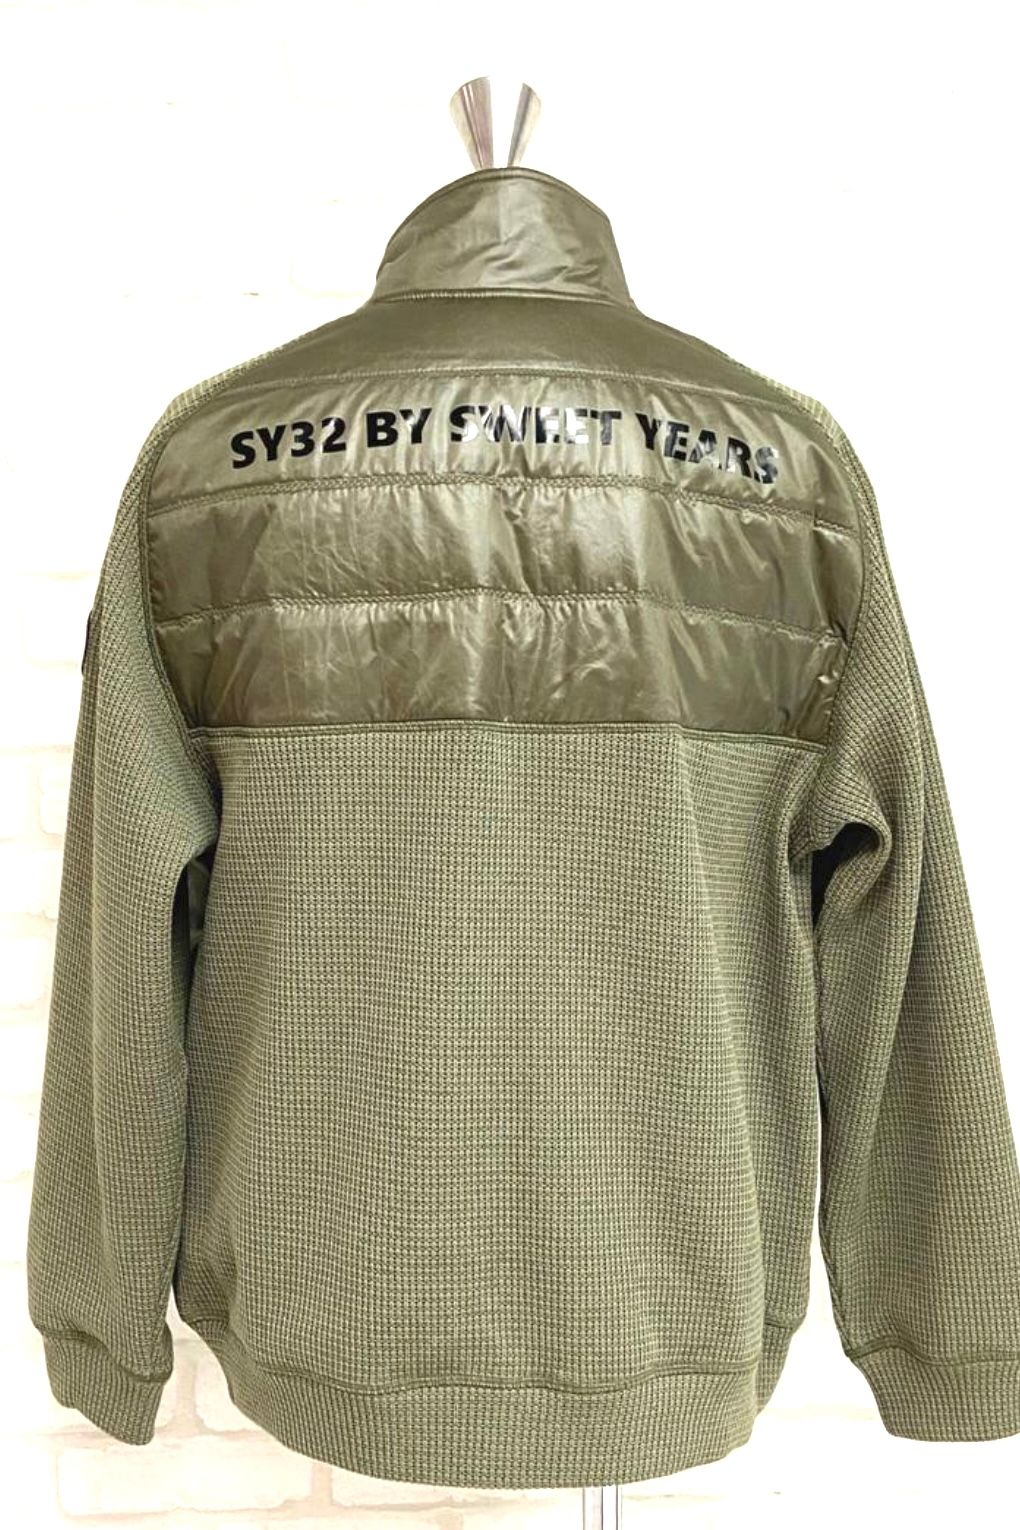 QUARTER FACE JACKET / KHAKI 【SY32 by SWEET YEARS GOLF】 - M